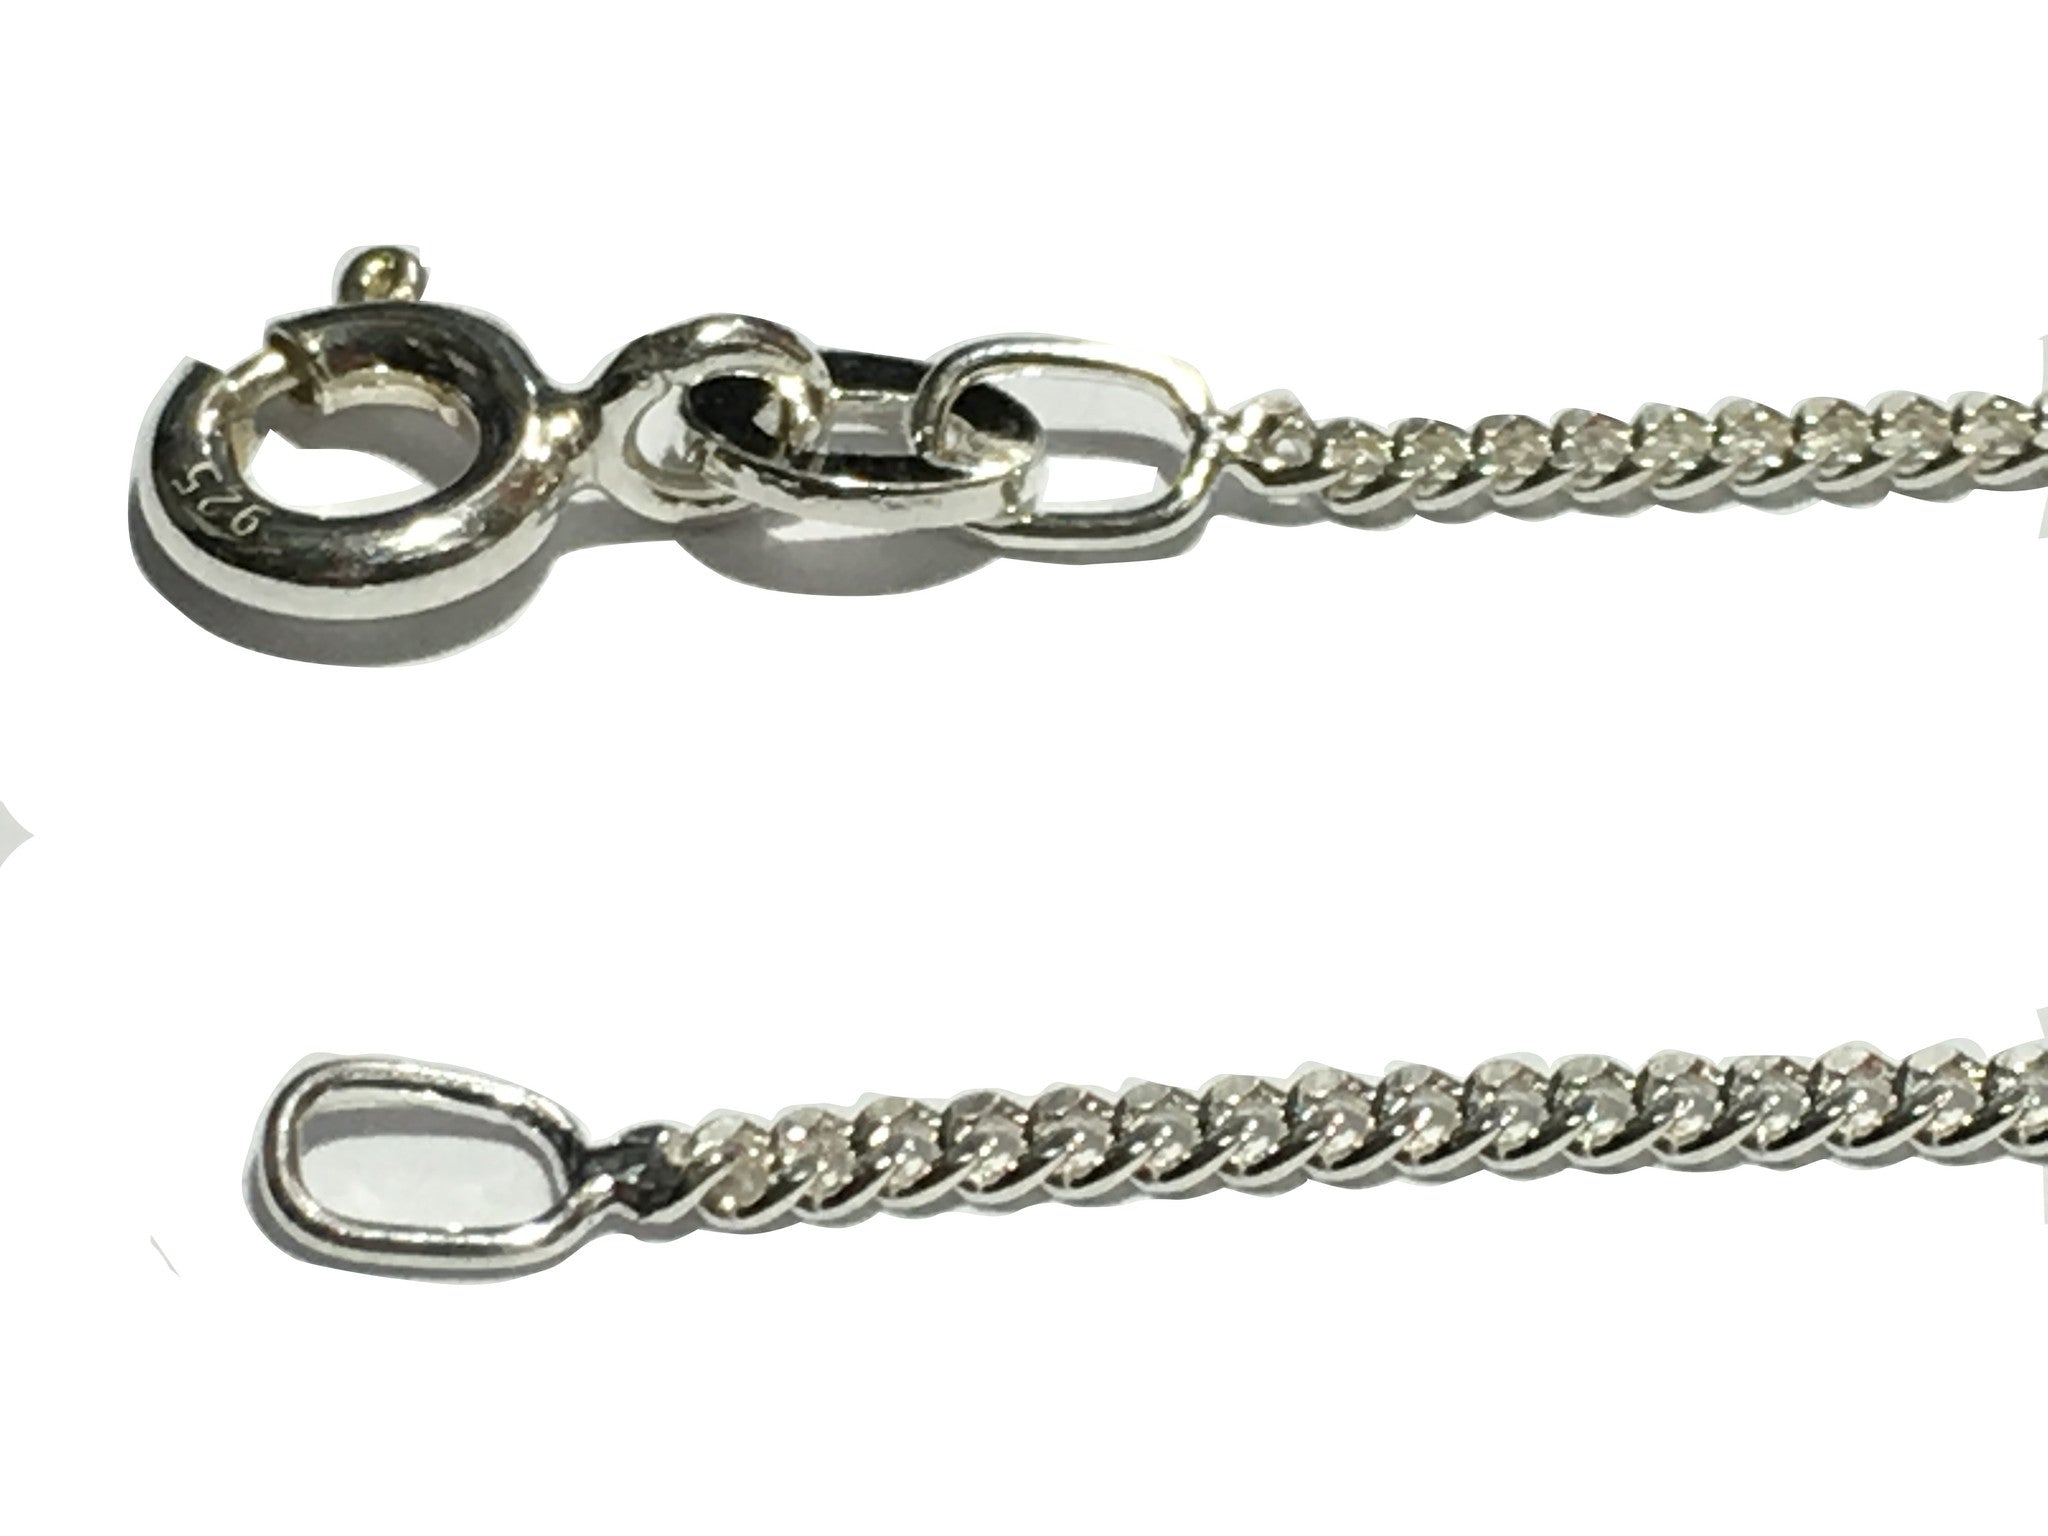 Sterling Silver Chain - 22" / 56cm long, Light Curb Link Chain - 925 Sterling Silver